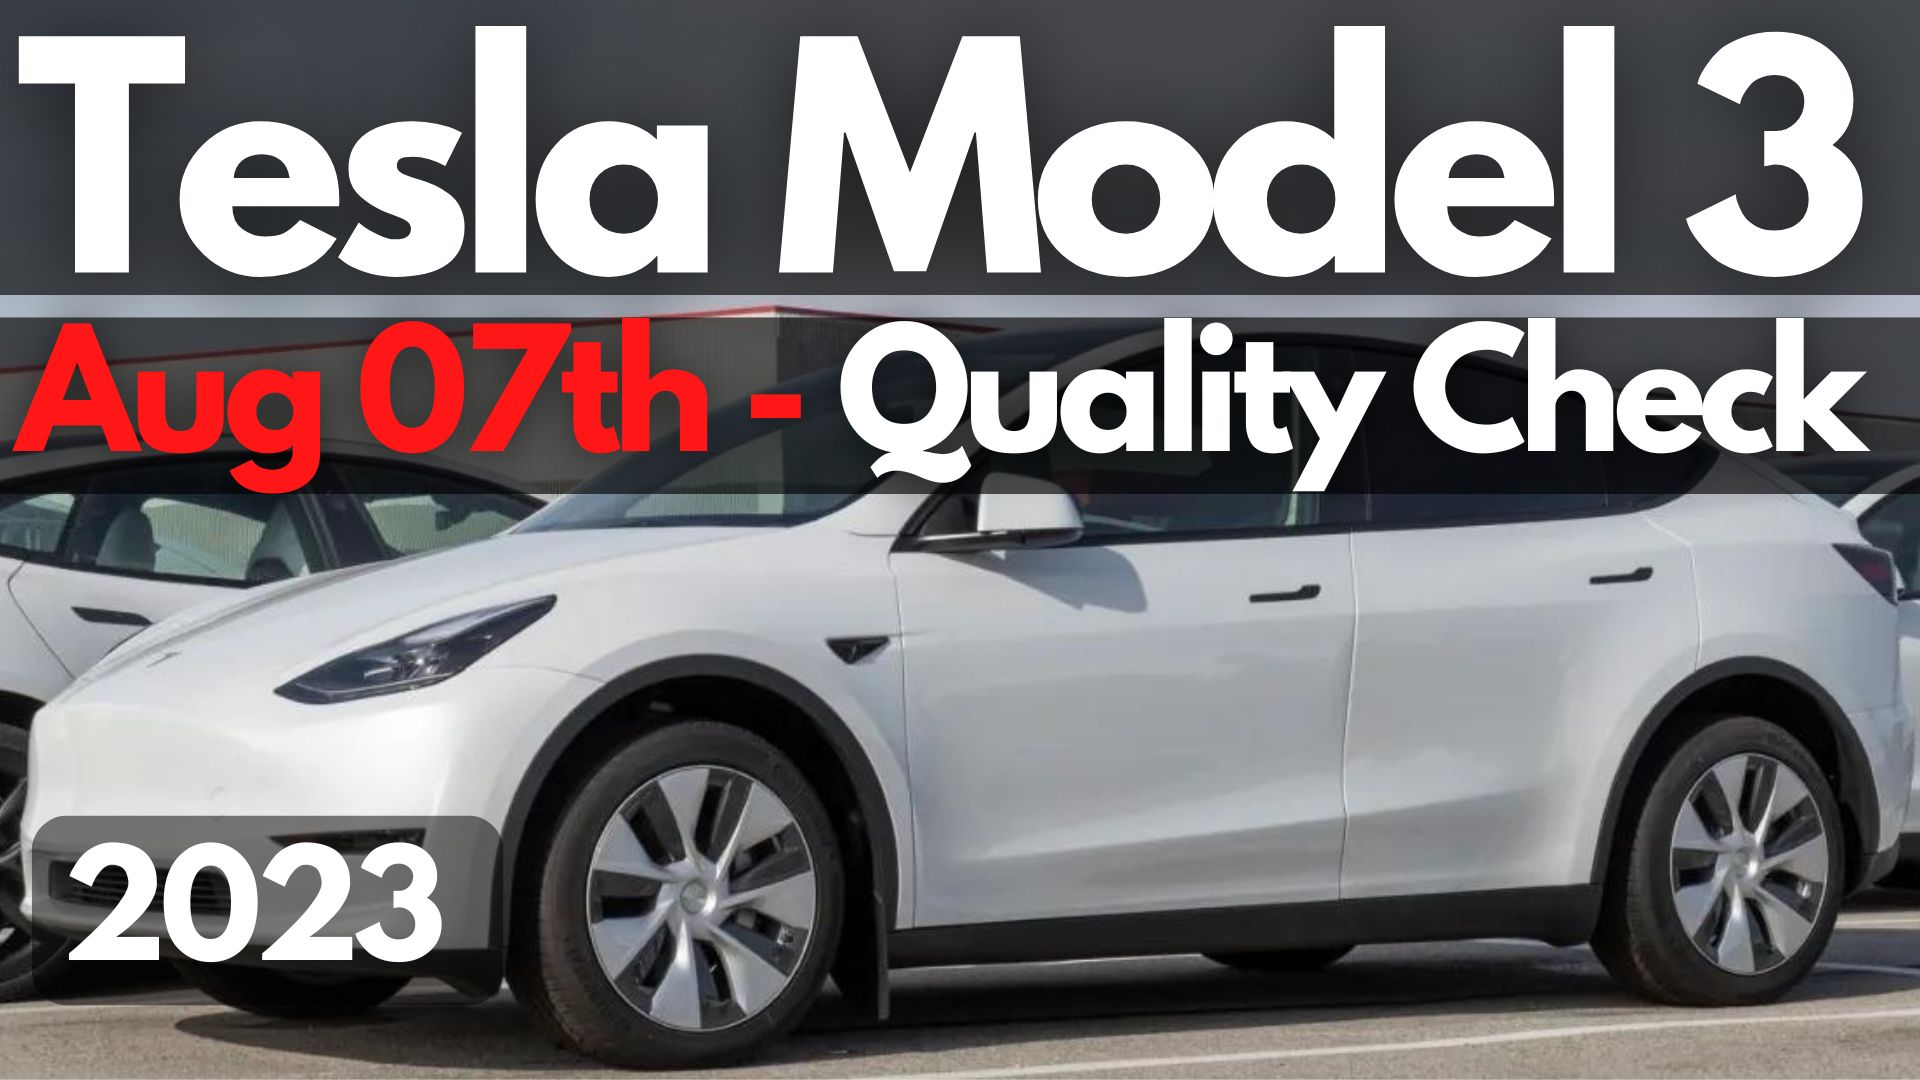 Has Tesla Improved The Model 3 Build Quality For Aug 07, 2023?